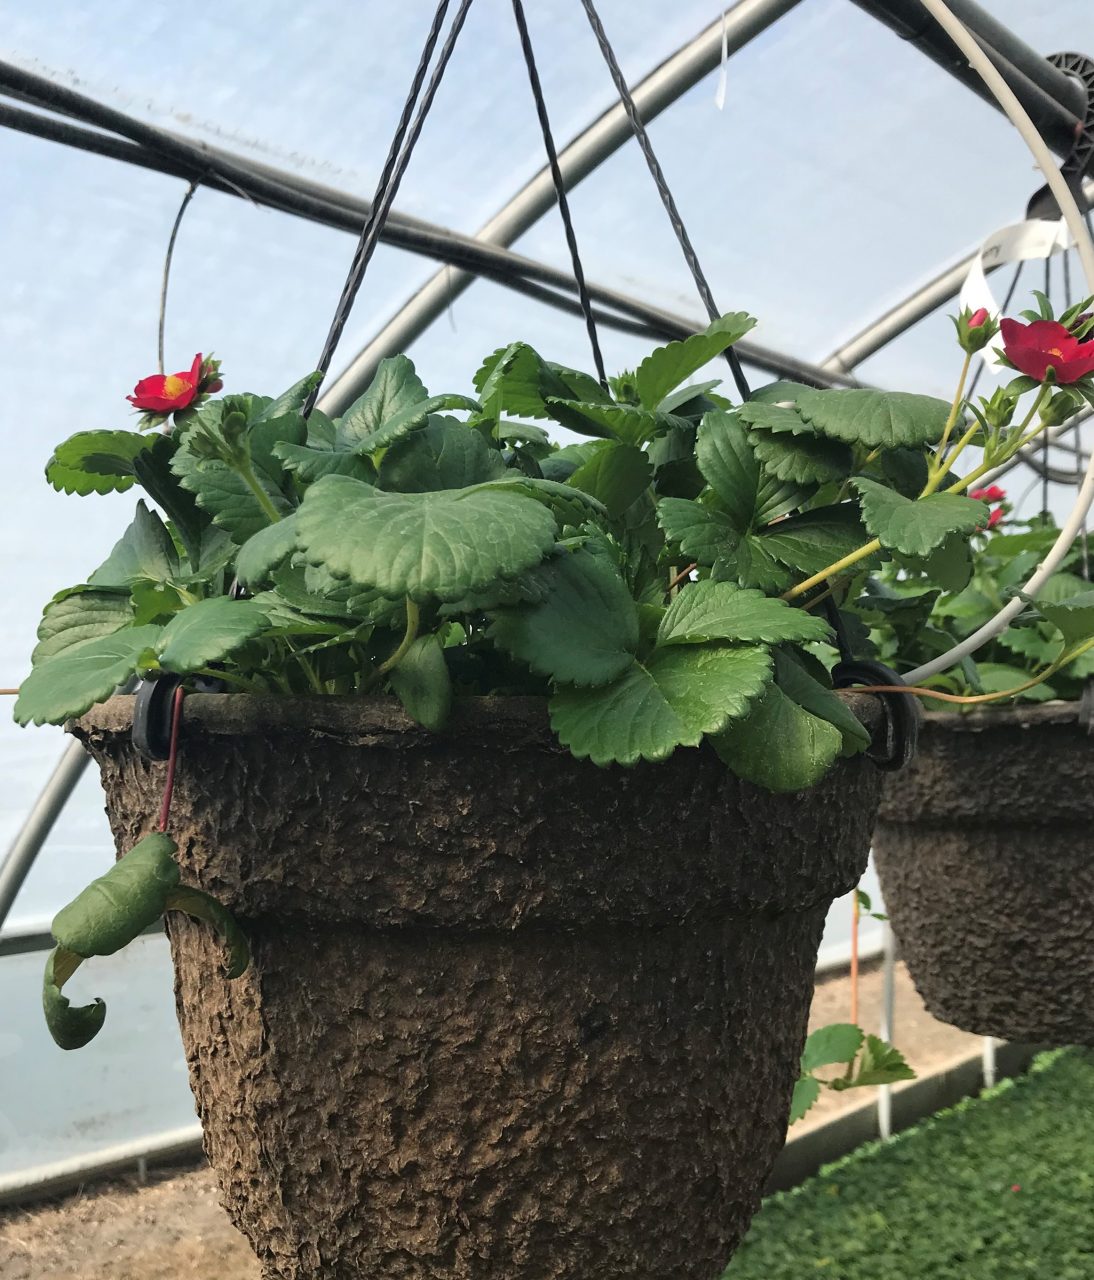 How To Grow Strawberries In Your Backyard - Simple Secrets To Success!